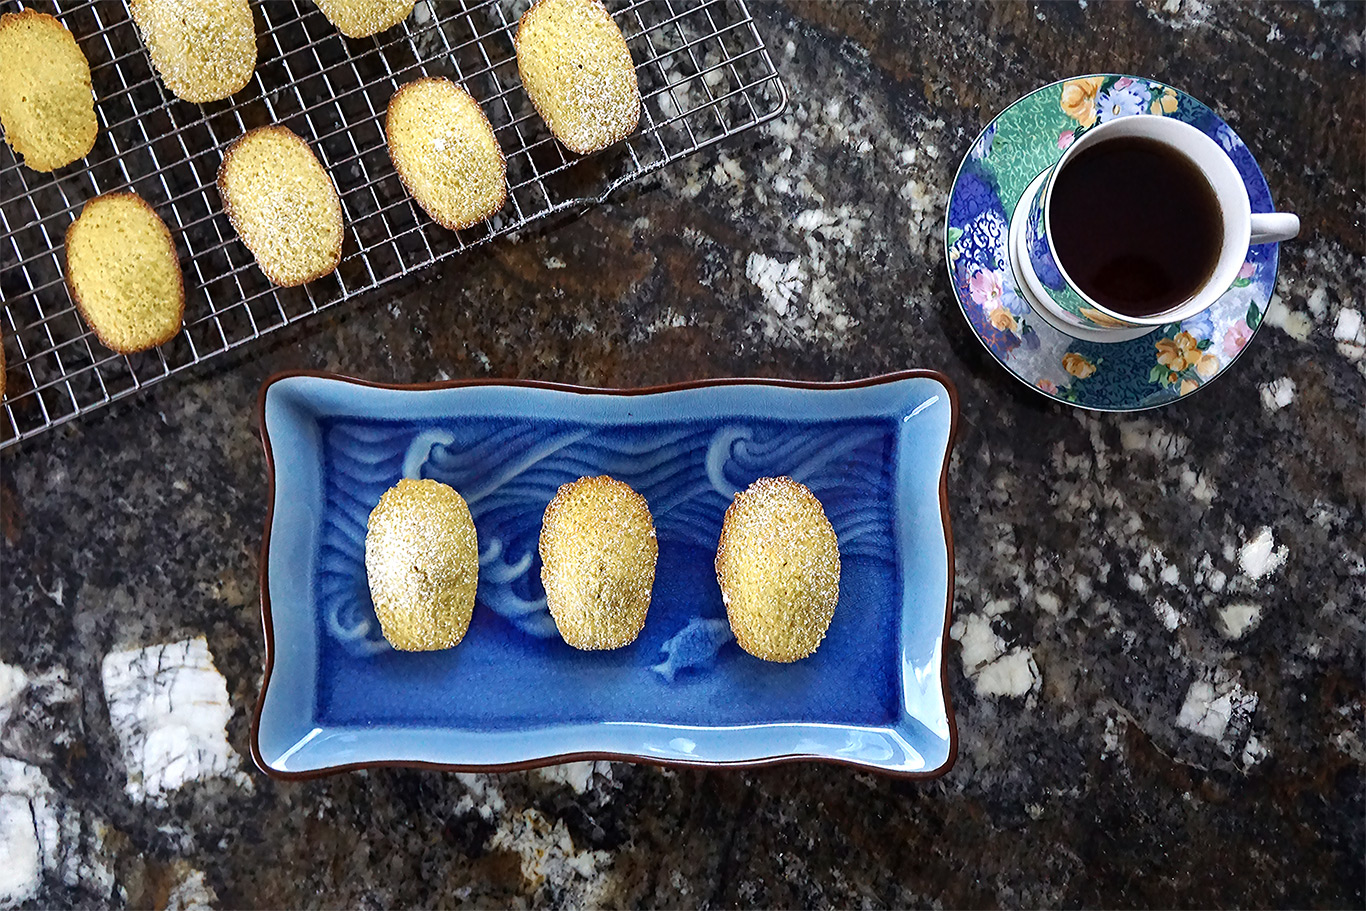 madeleines on a blue plate with a teacup nearby